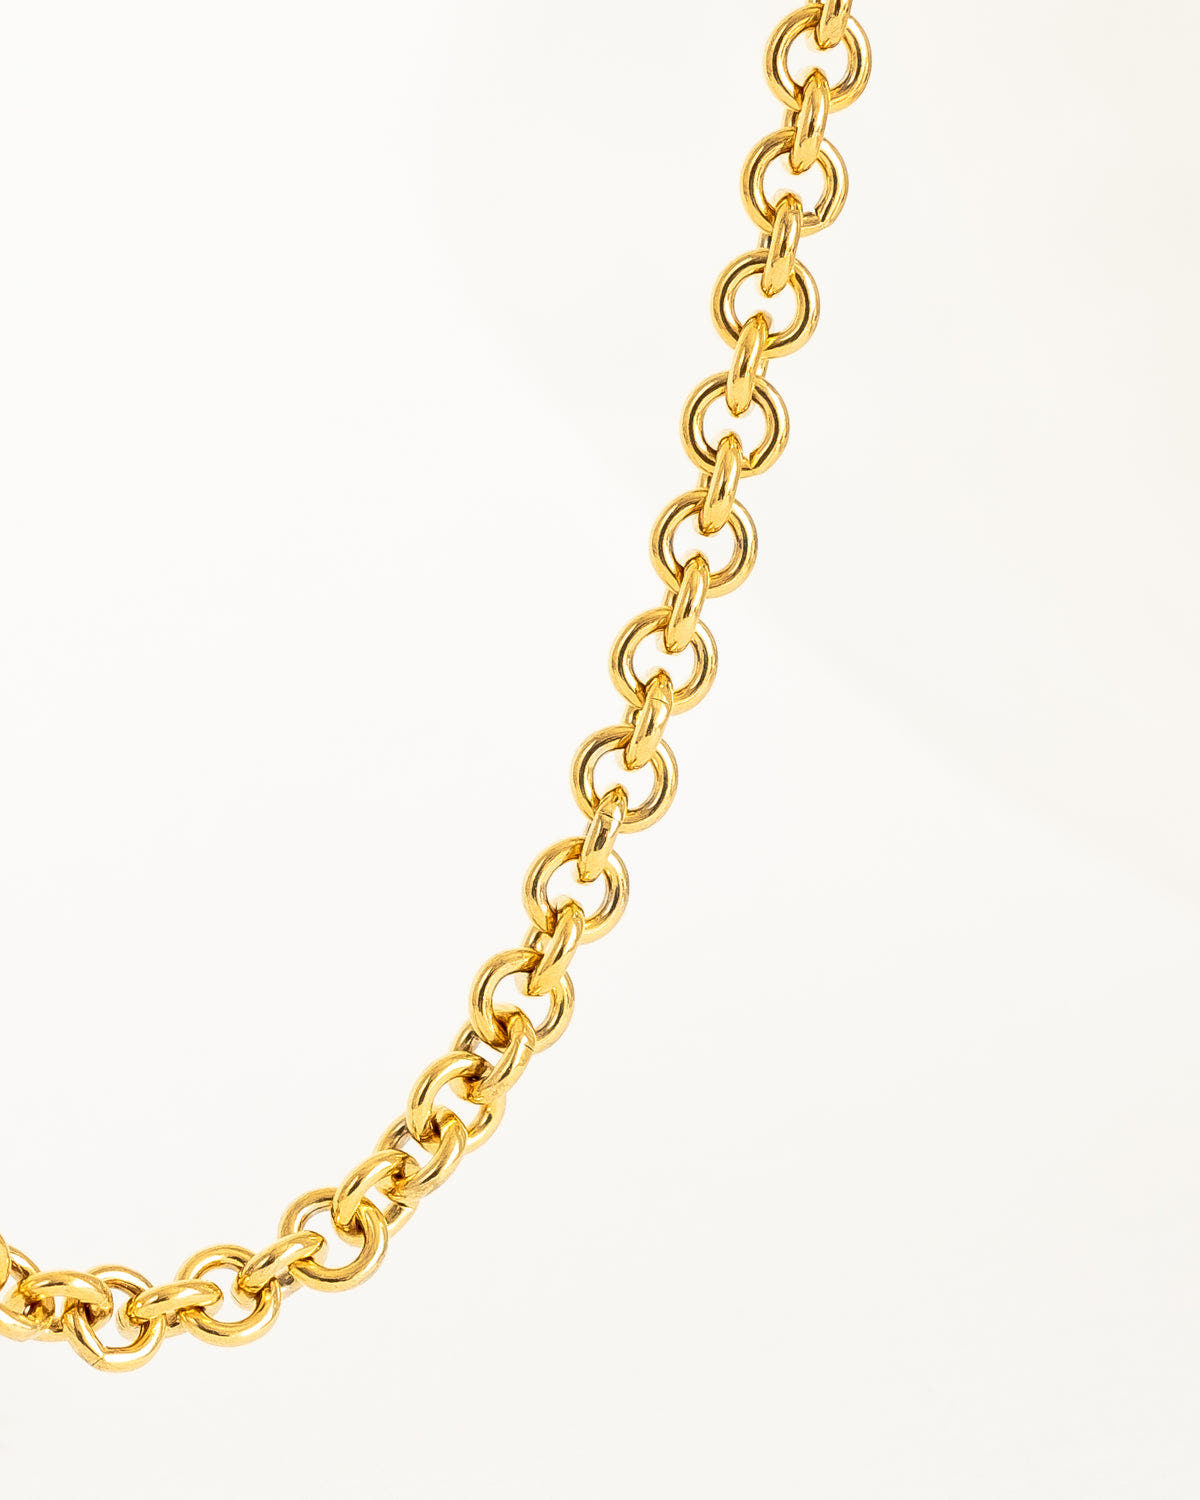 Stylish heavy gold plated chain choker necklace Rolo chain freeshipping - Ollijewelry